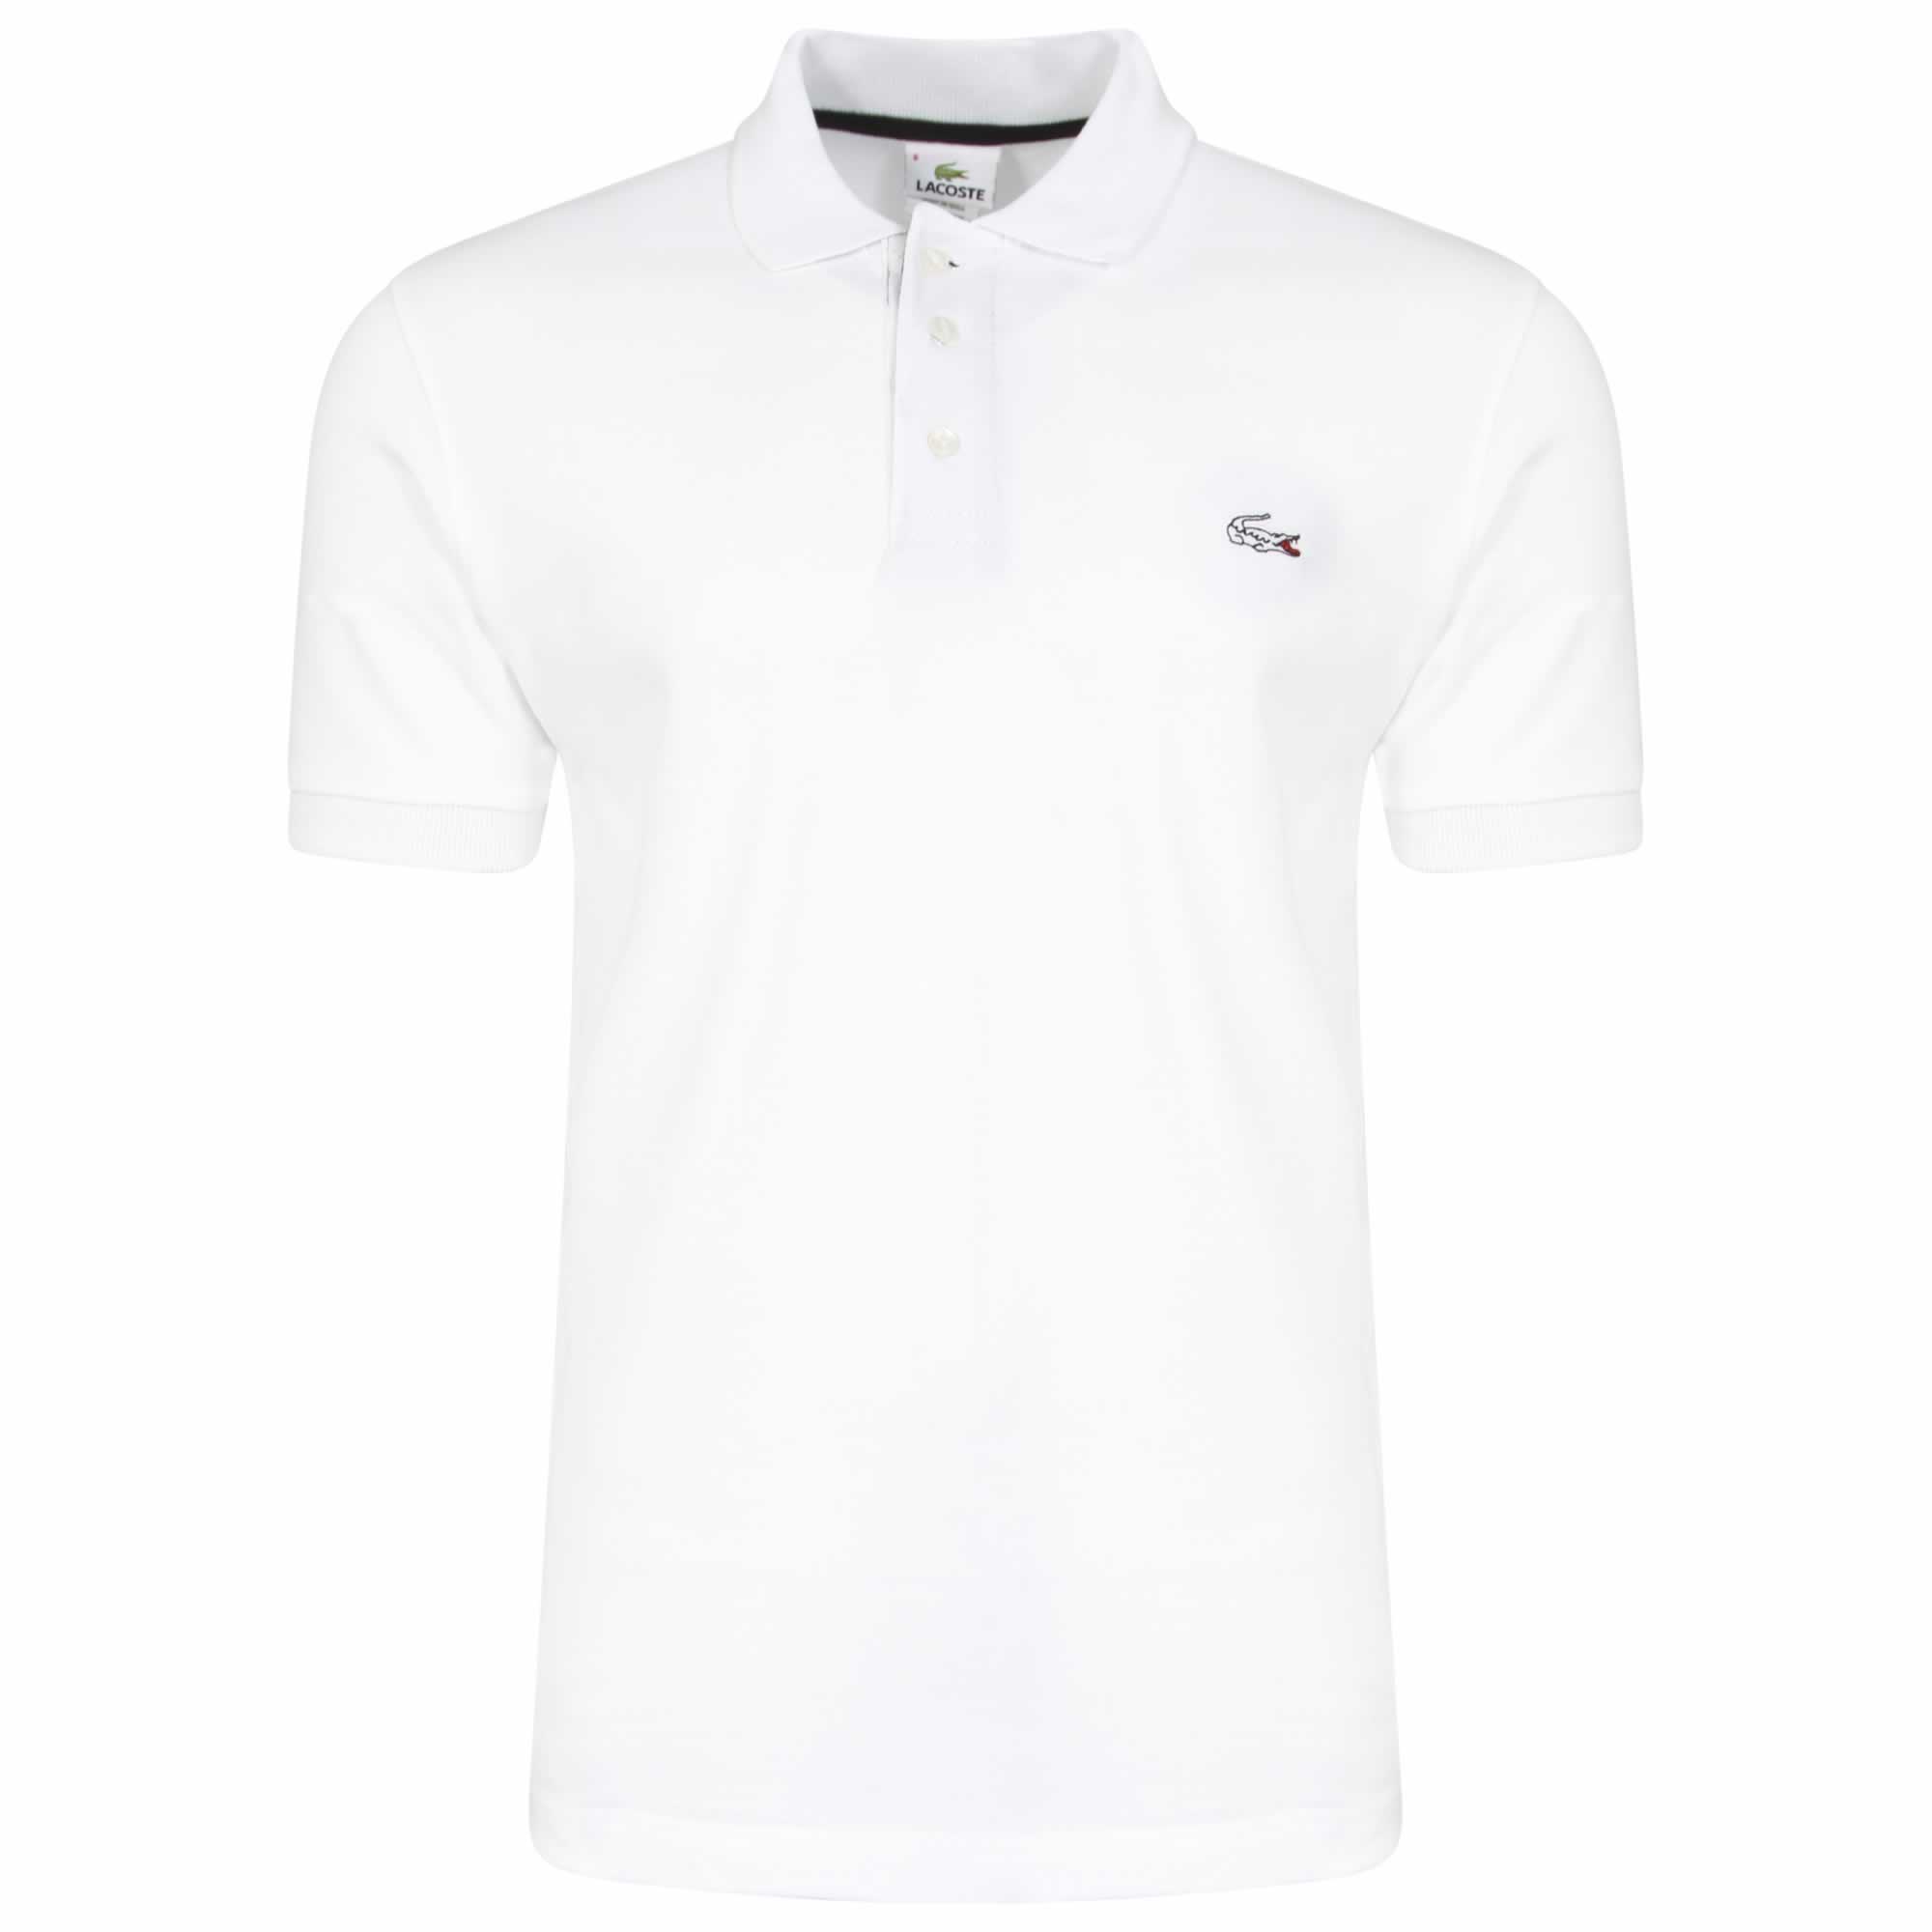 Lacoste Short Sleeve Polo Shirts. Slim Fit. Various Colours | INTOTO7 ...